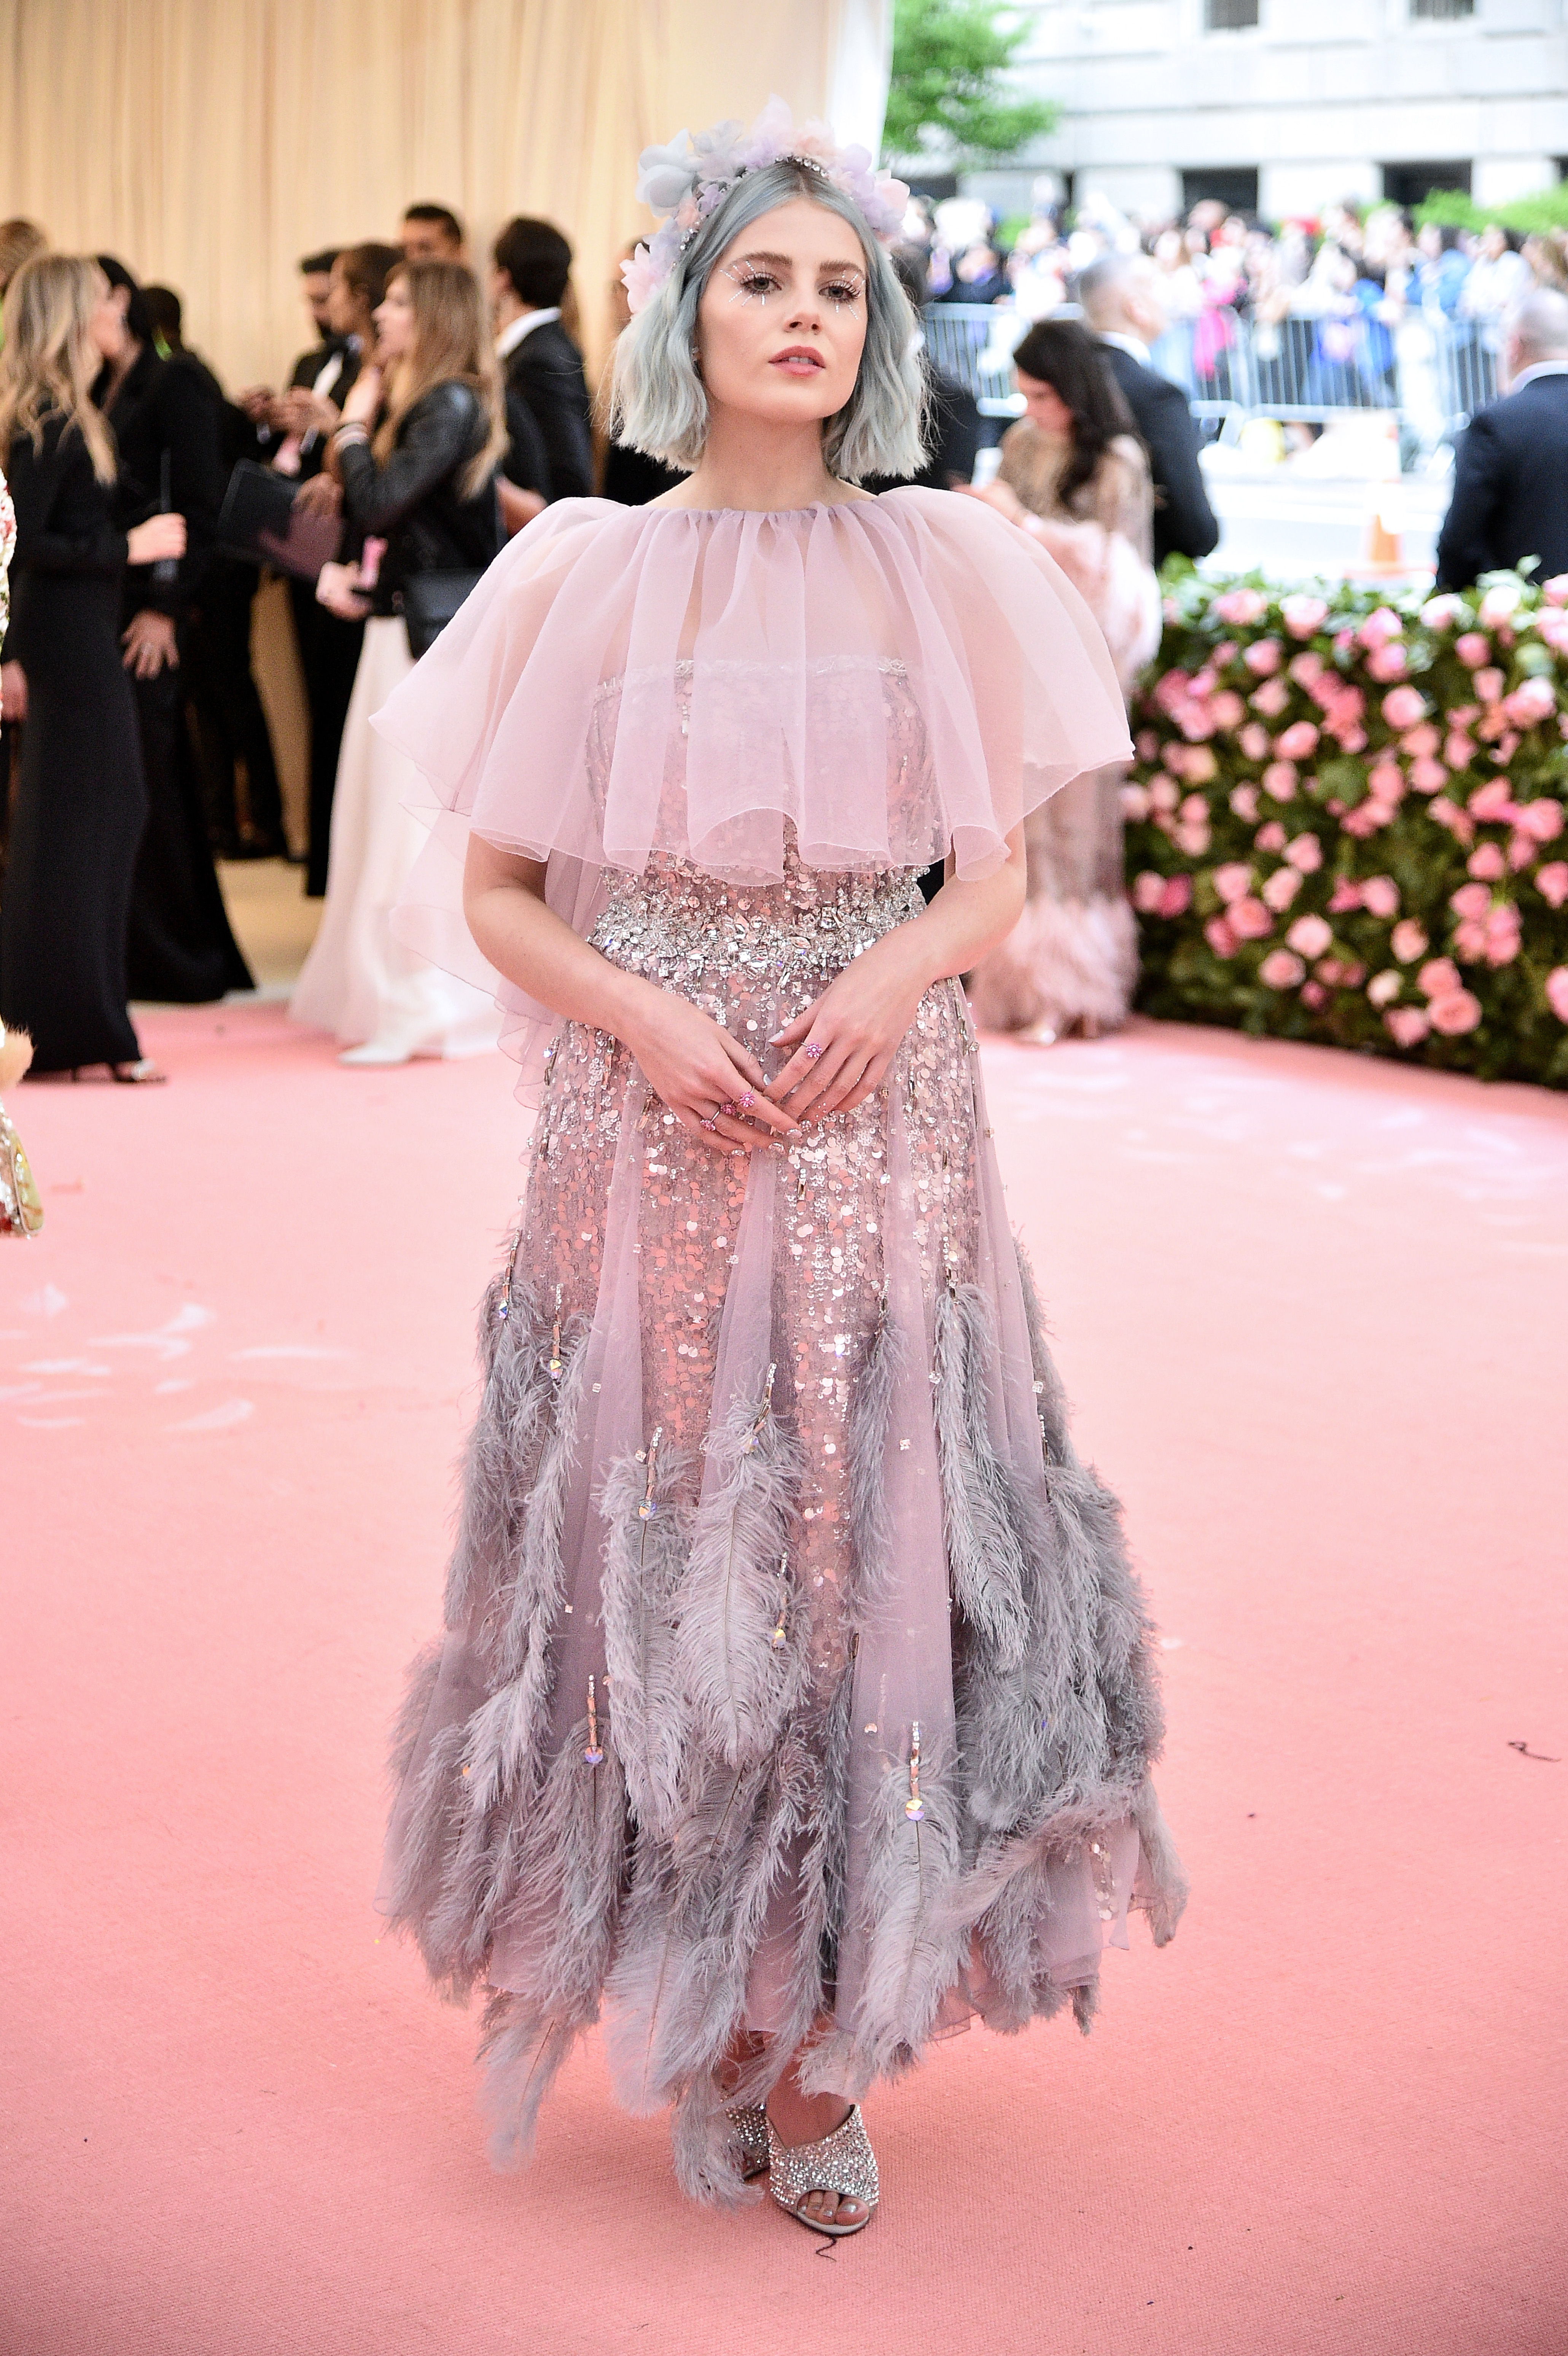 NEW YORK, NEW YORK - MAY 06: Lucy Boynton attends The 2019 Met Gala Celebrating Camp: Notes on Fashion at Metropolitan Museum of Art on May 06, 2019 in New York City. (Photo by Theo Wargo/WireImage)